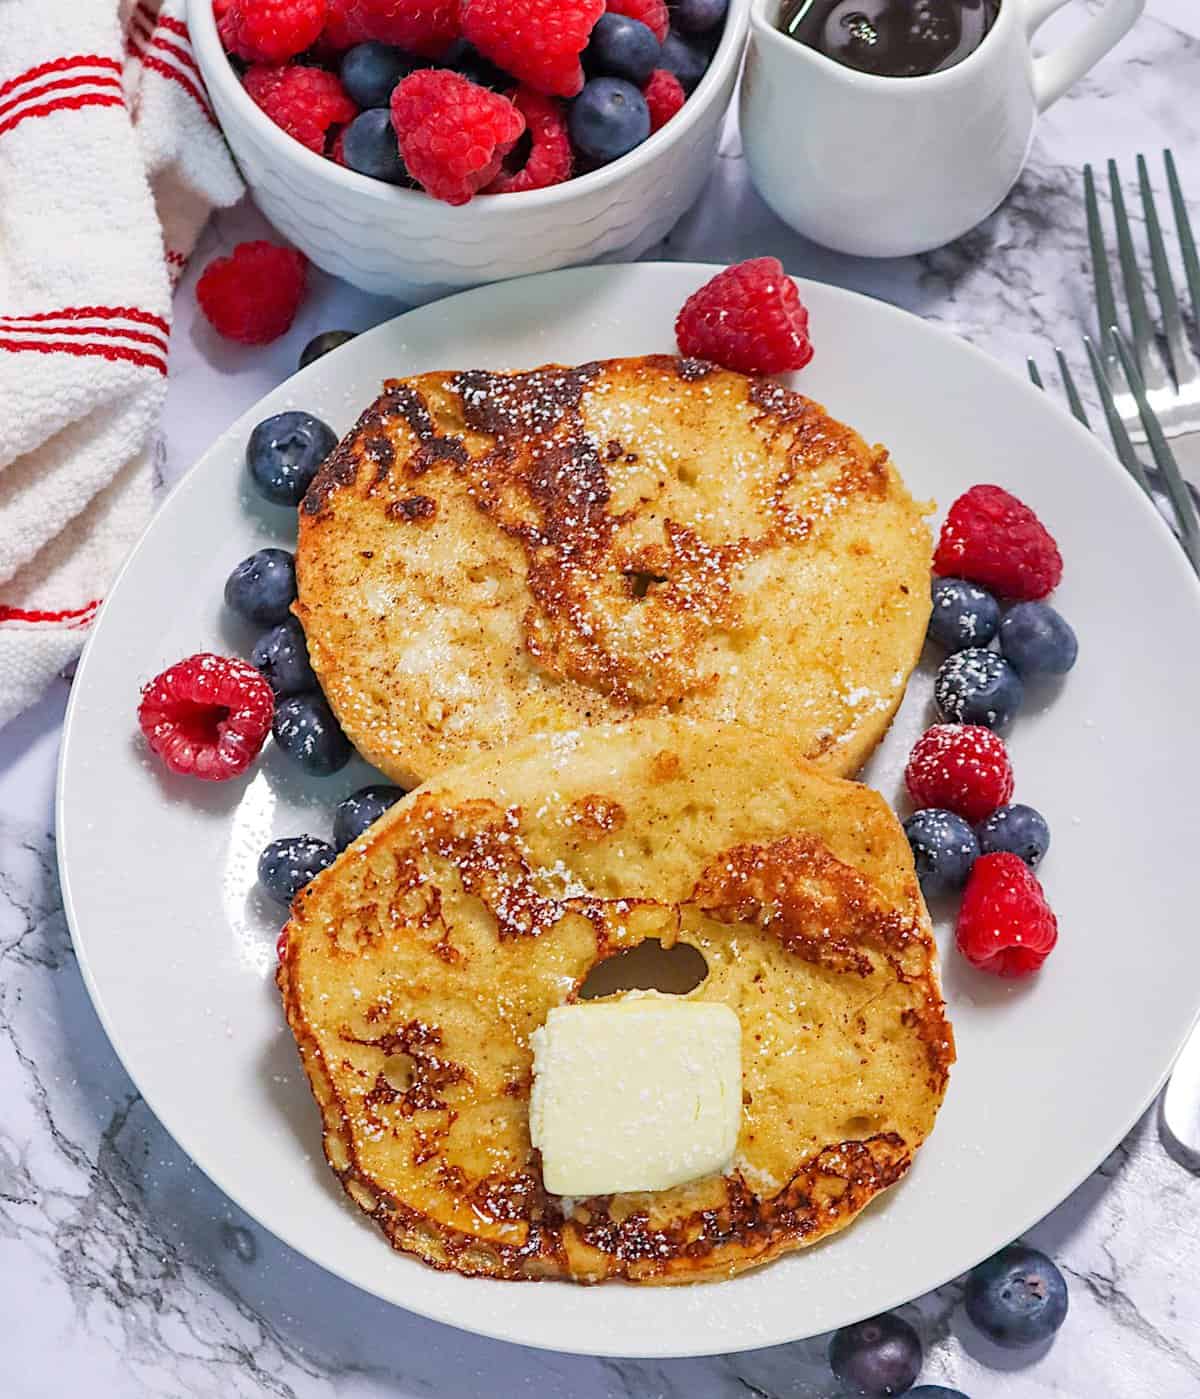 Melting a pat of butter on freshly made French Toast Bagels with berries